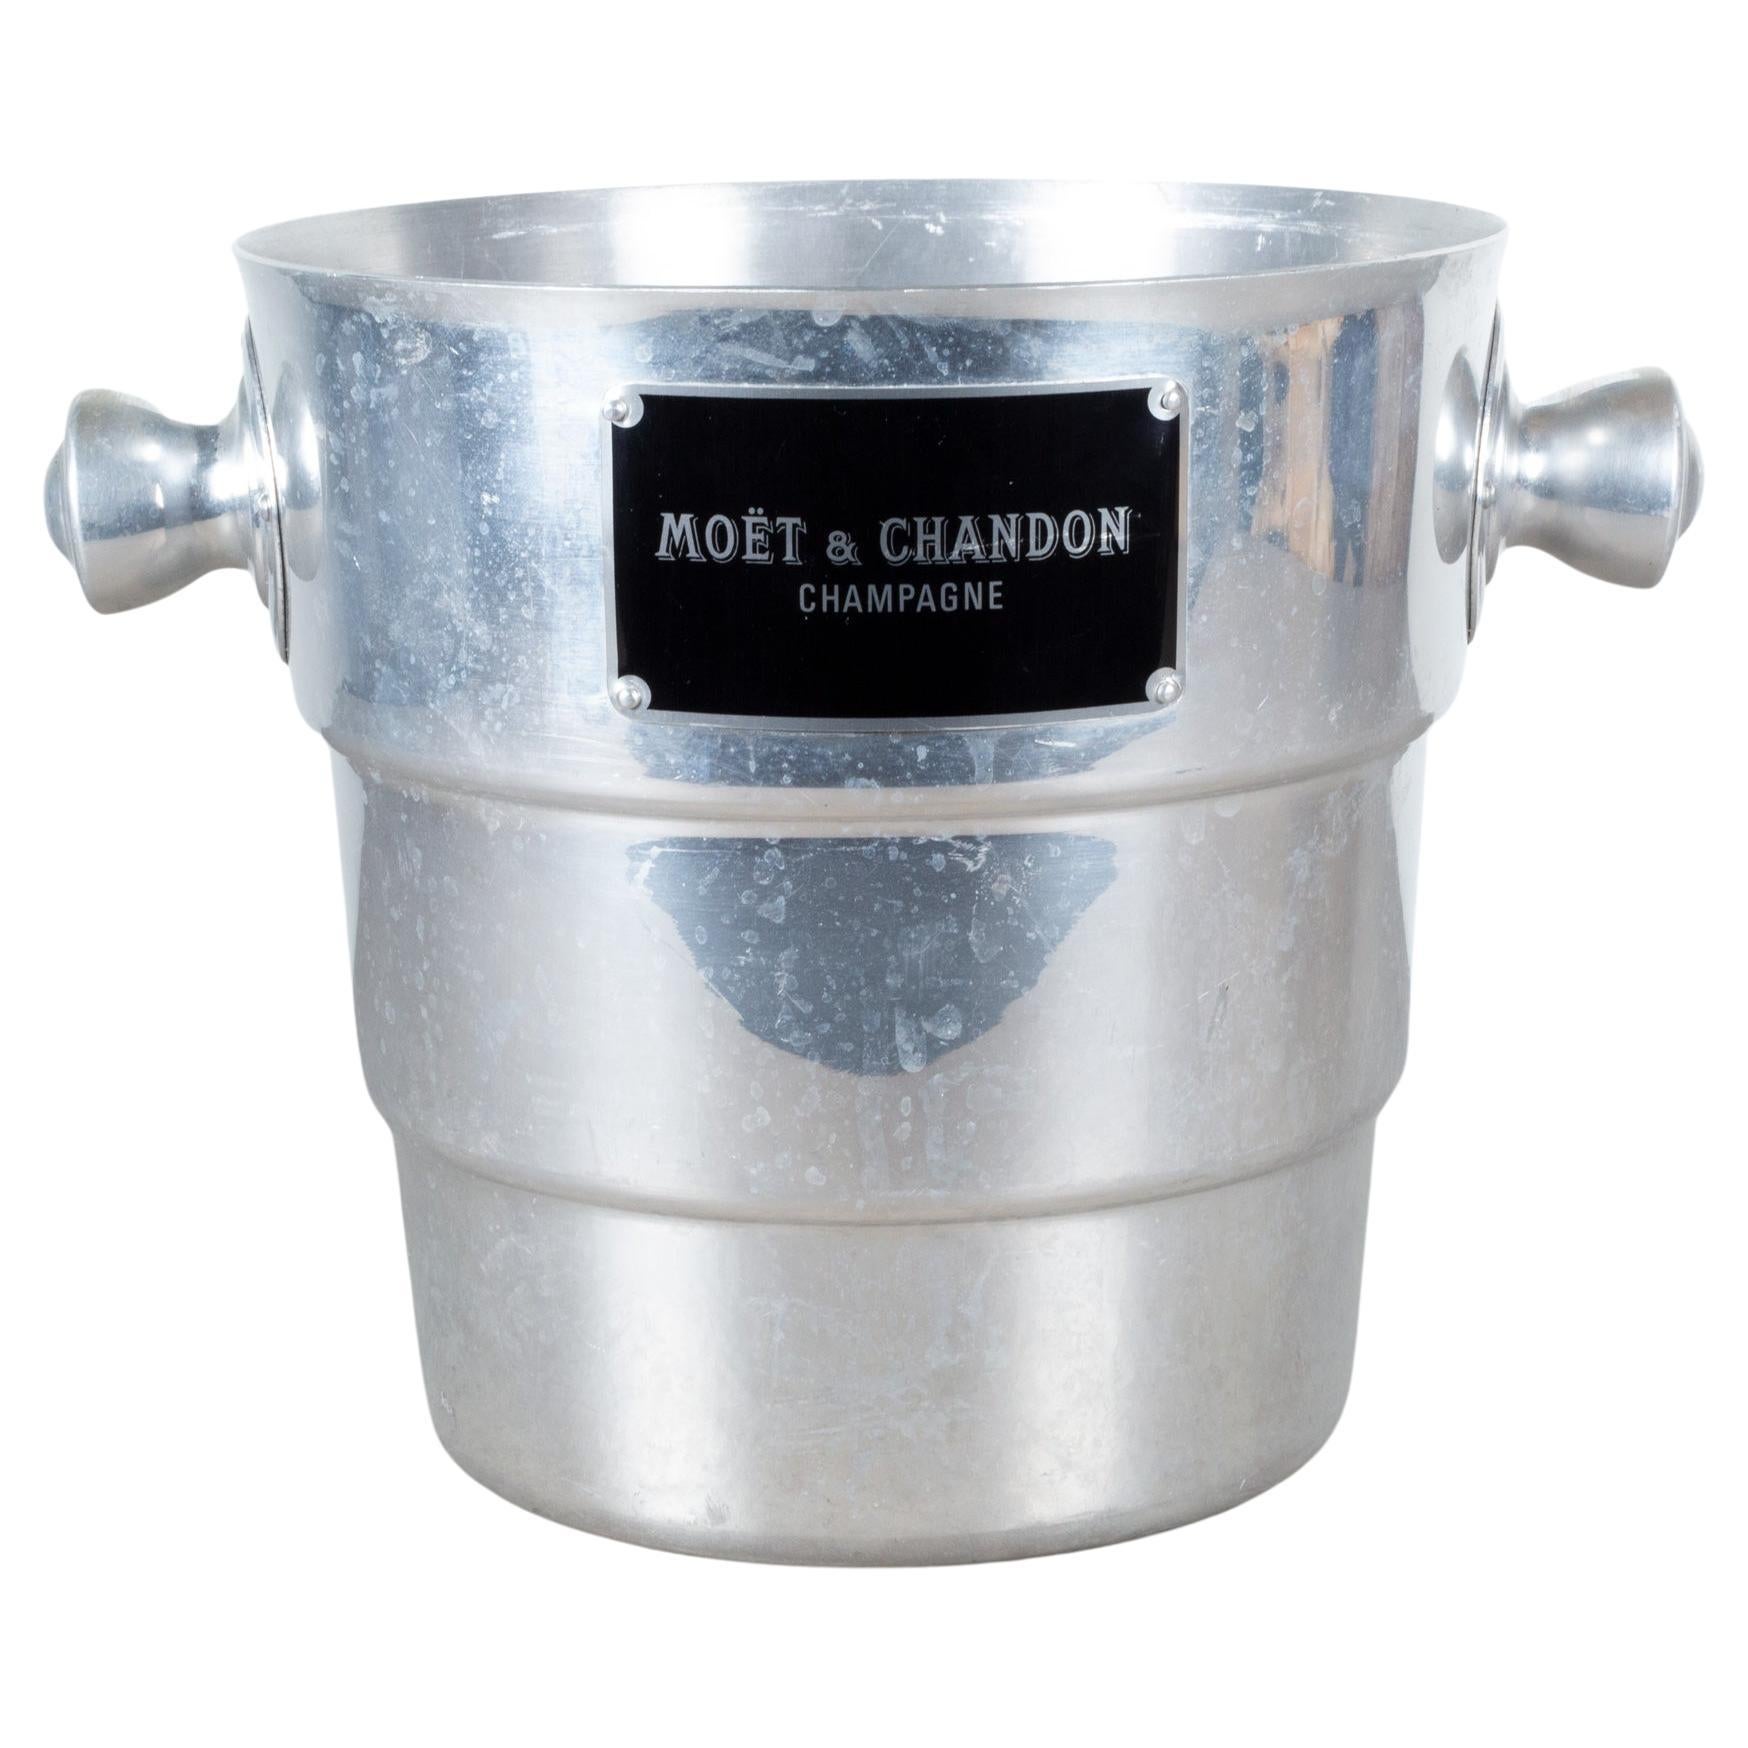 Vintage Moet & Chandon Champagne Ice Bucket c.1940 (FREE SHIPPING) For Sale